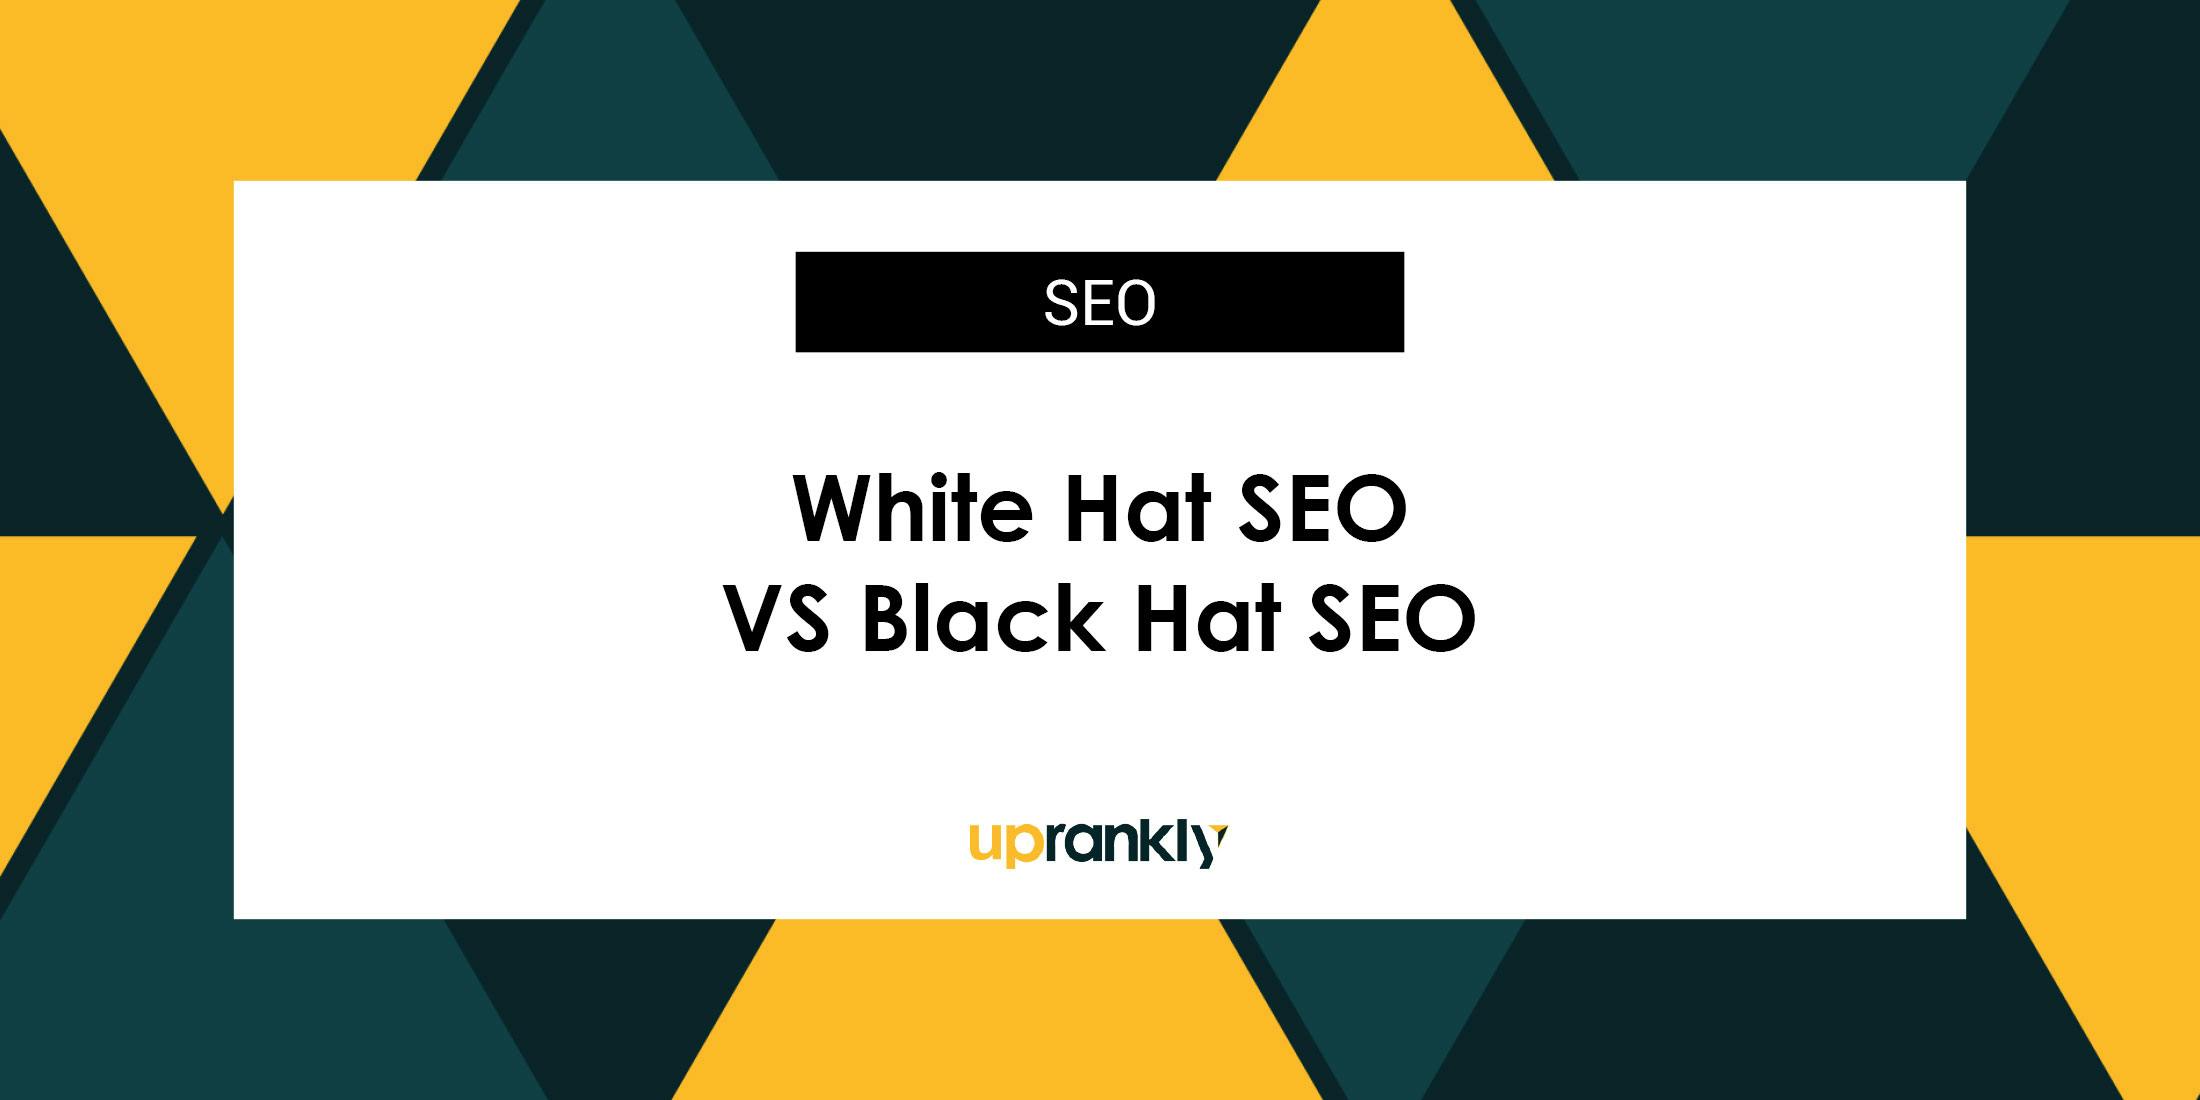 White Hat SEO Vs Black Hat SEO: How to Play by the Rules and Win